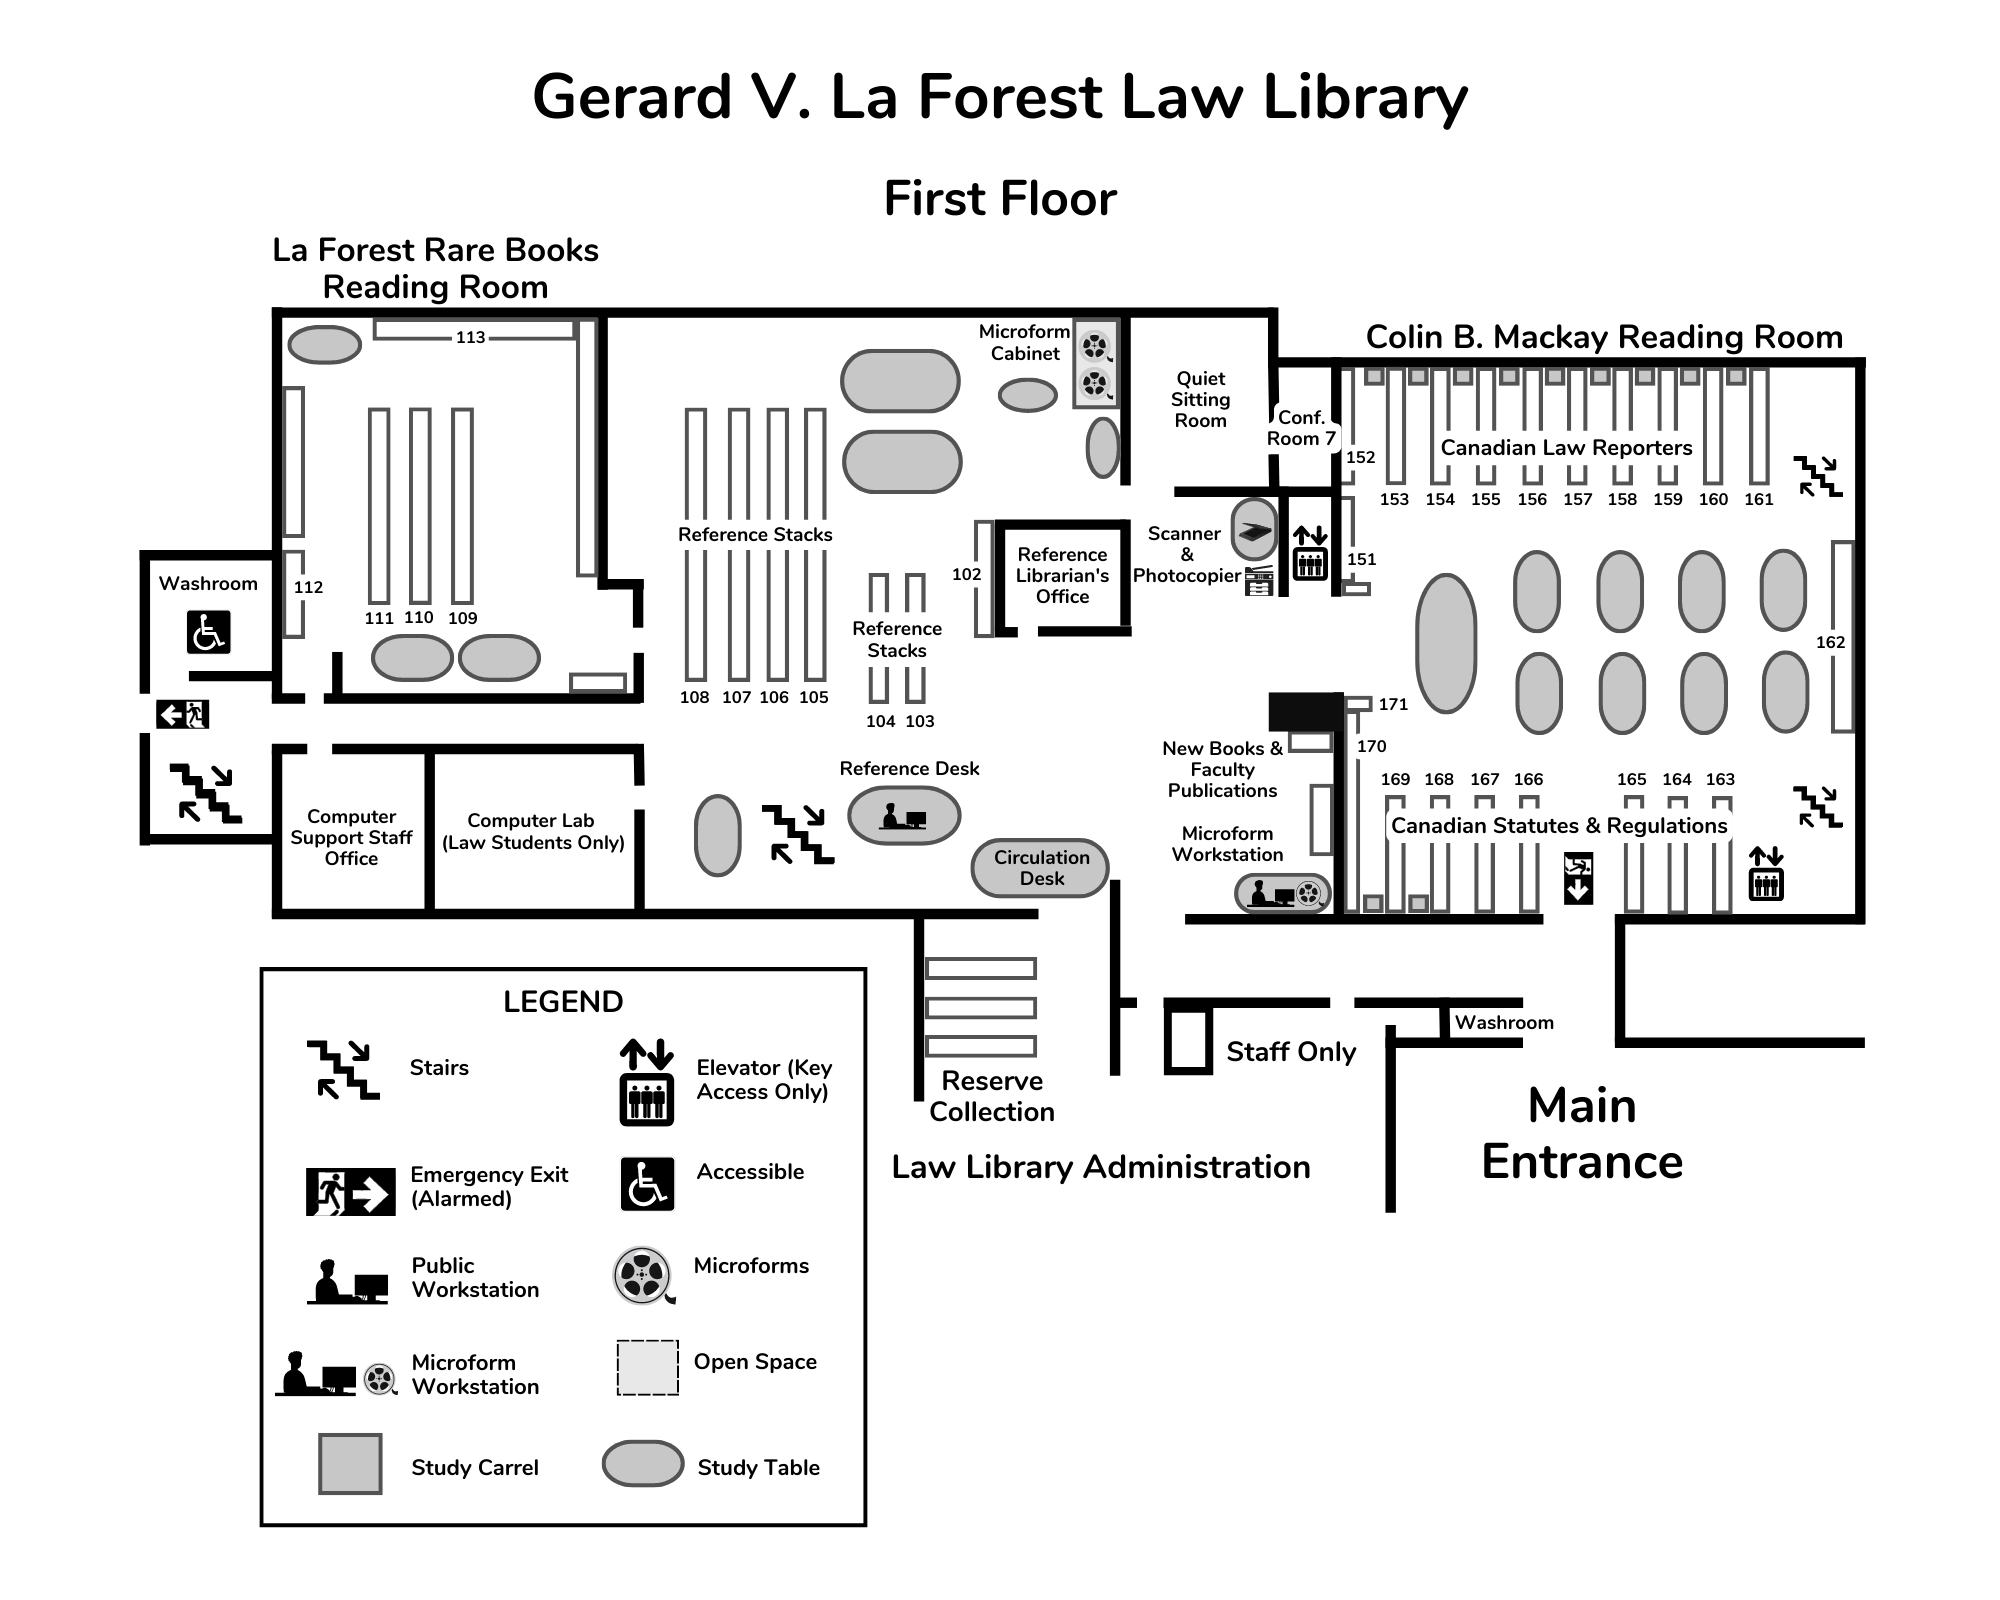 Law Library, First Floor